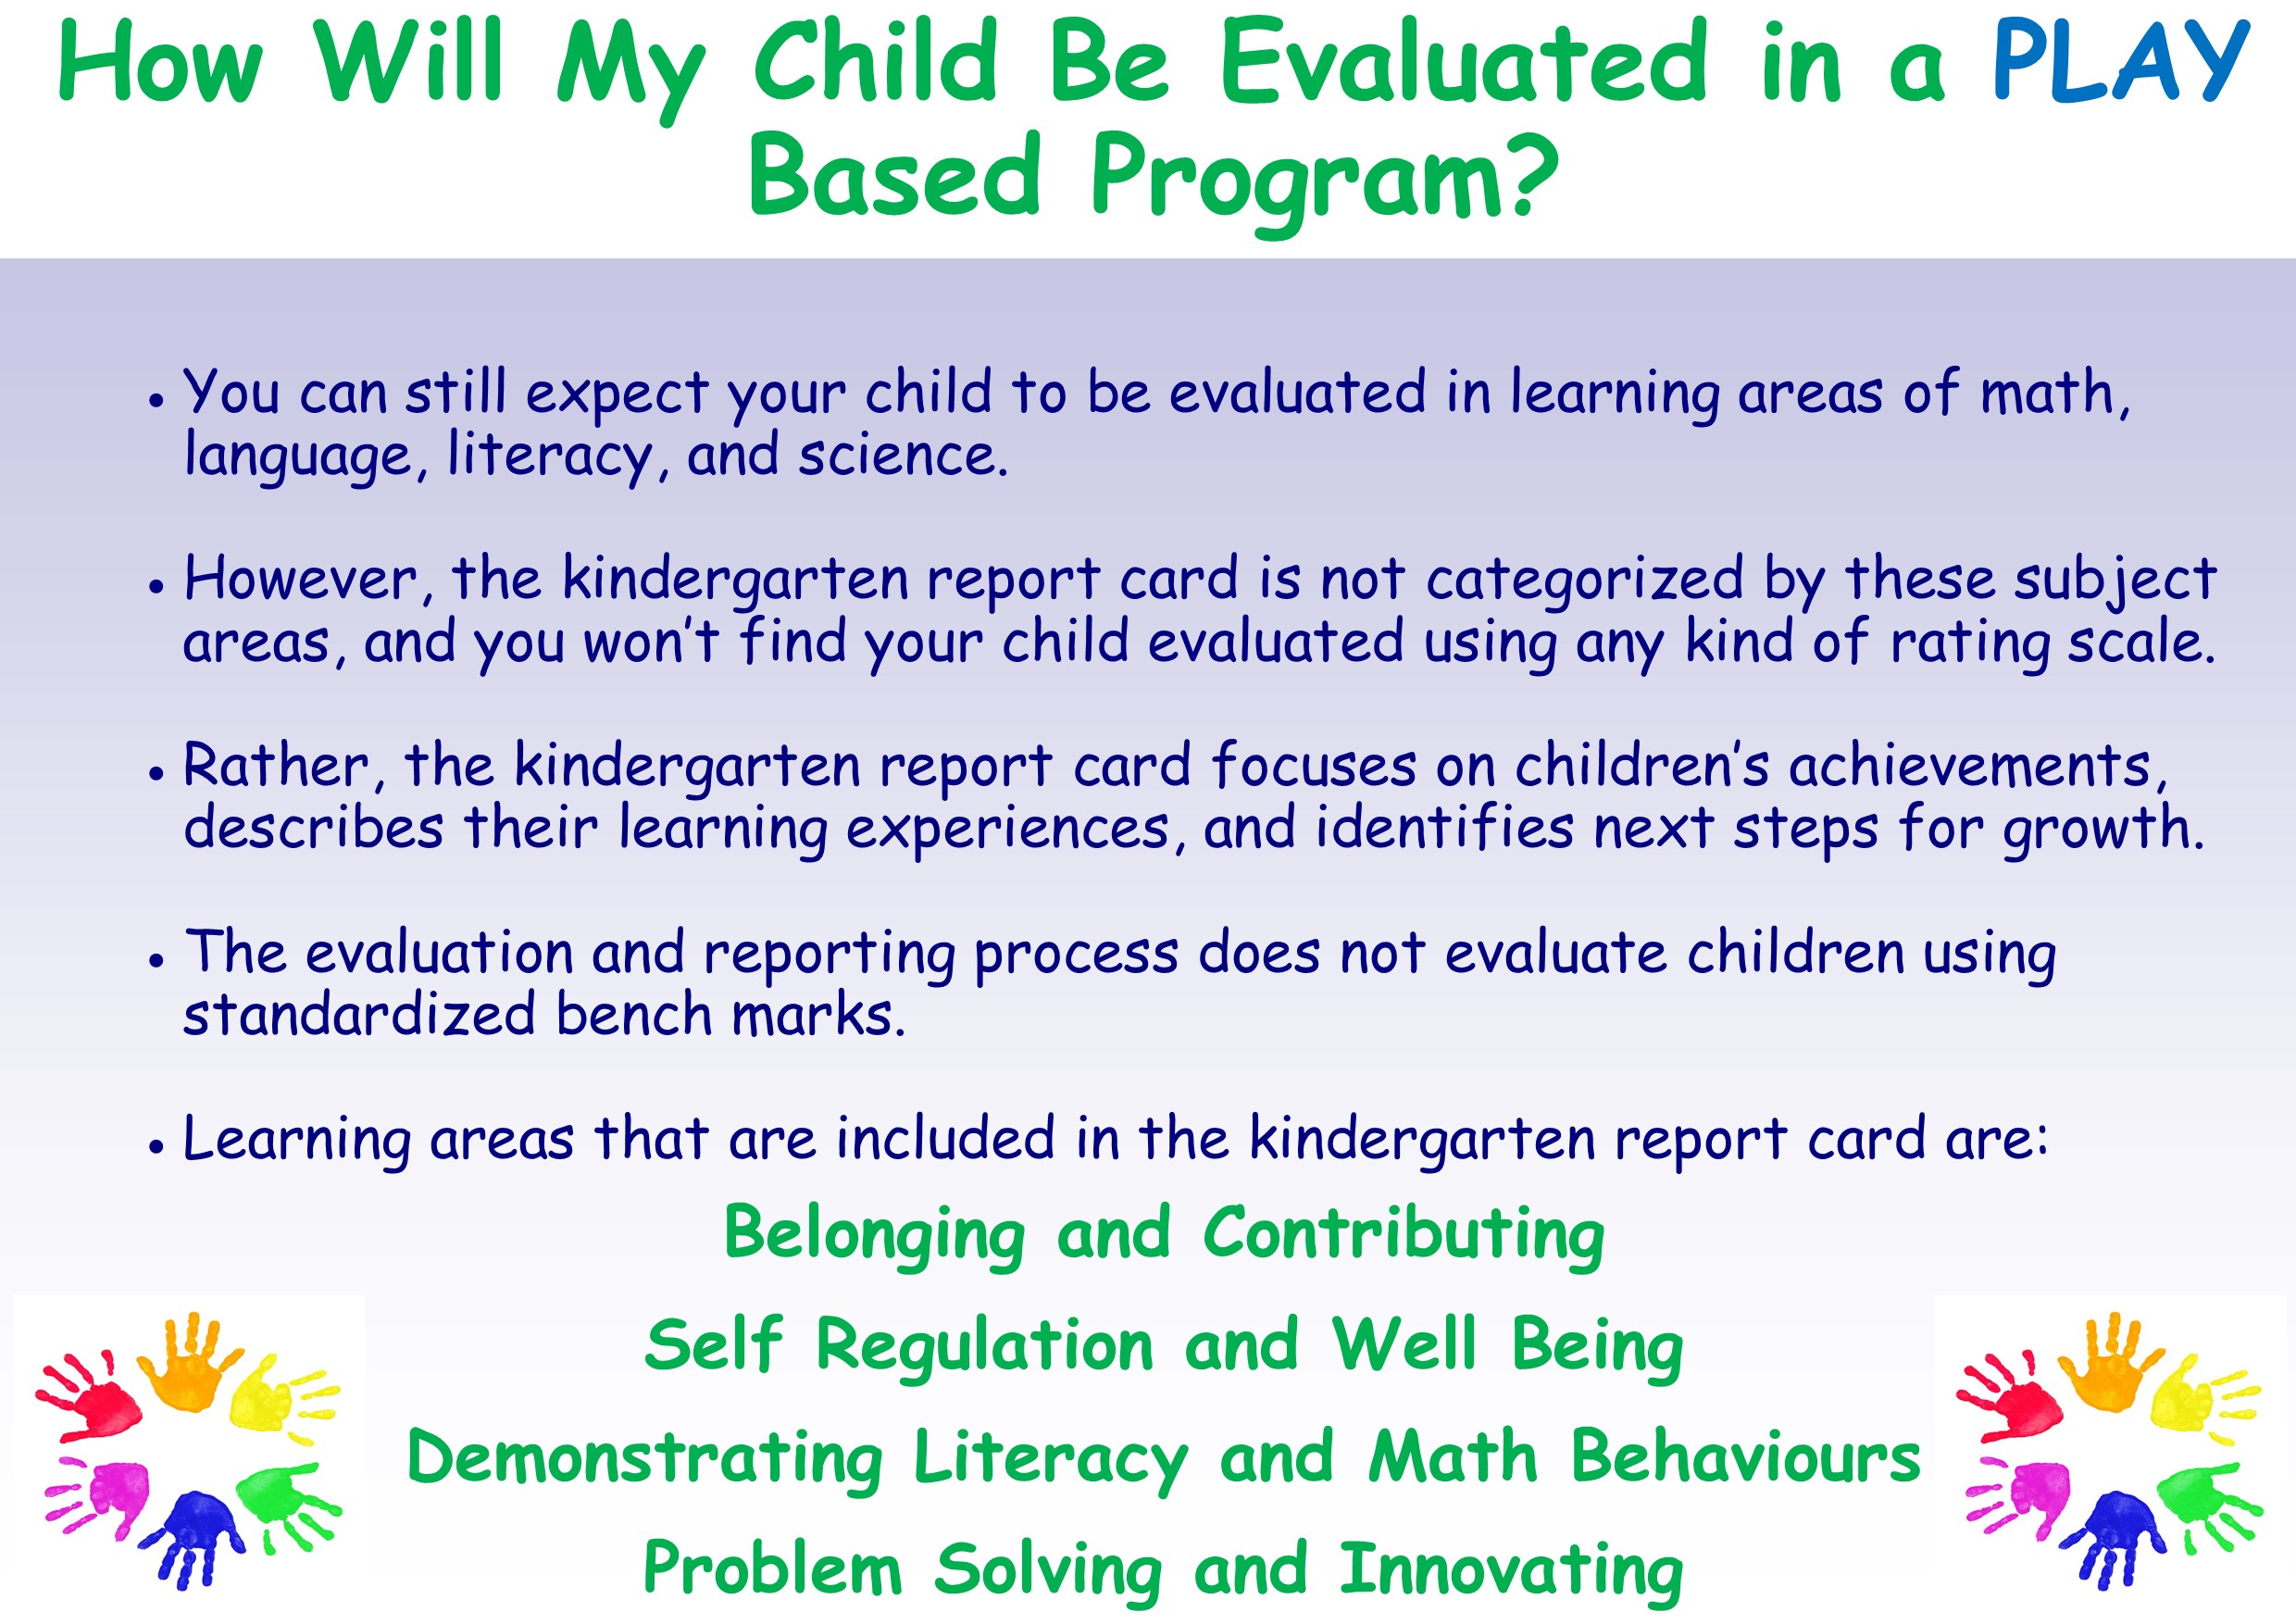 How will my child be evaluated in a Play Based Program? 